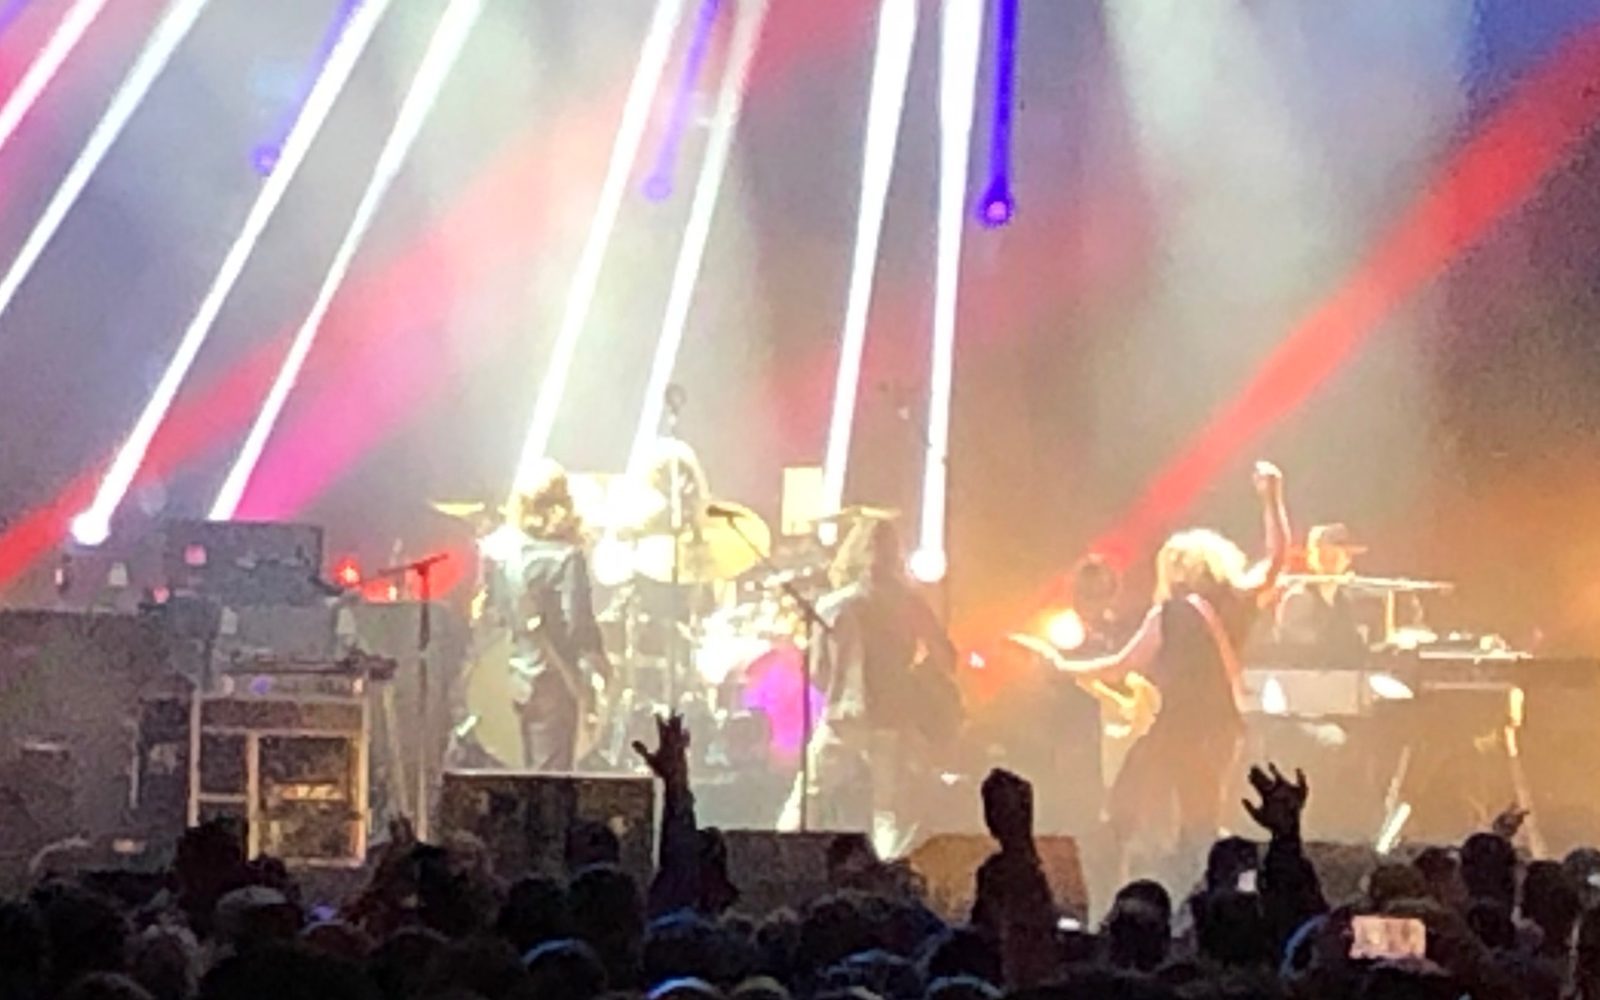 My Morning Jacket on stage in Boston